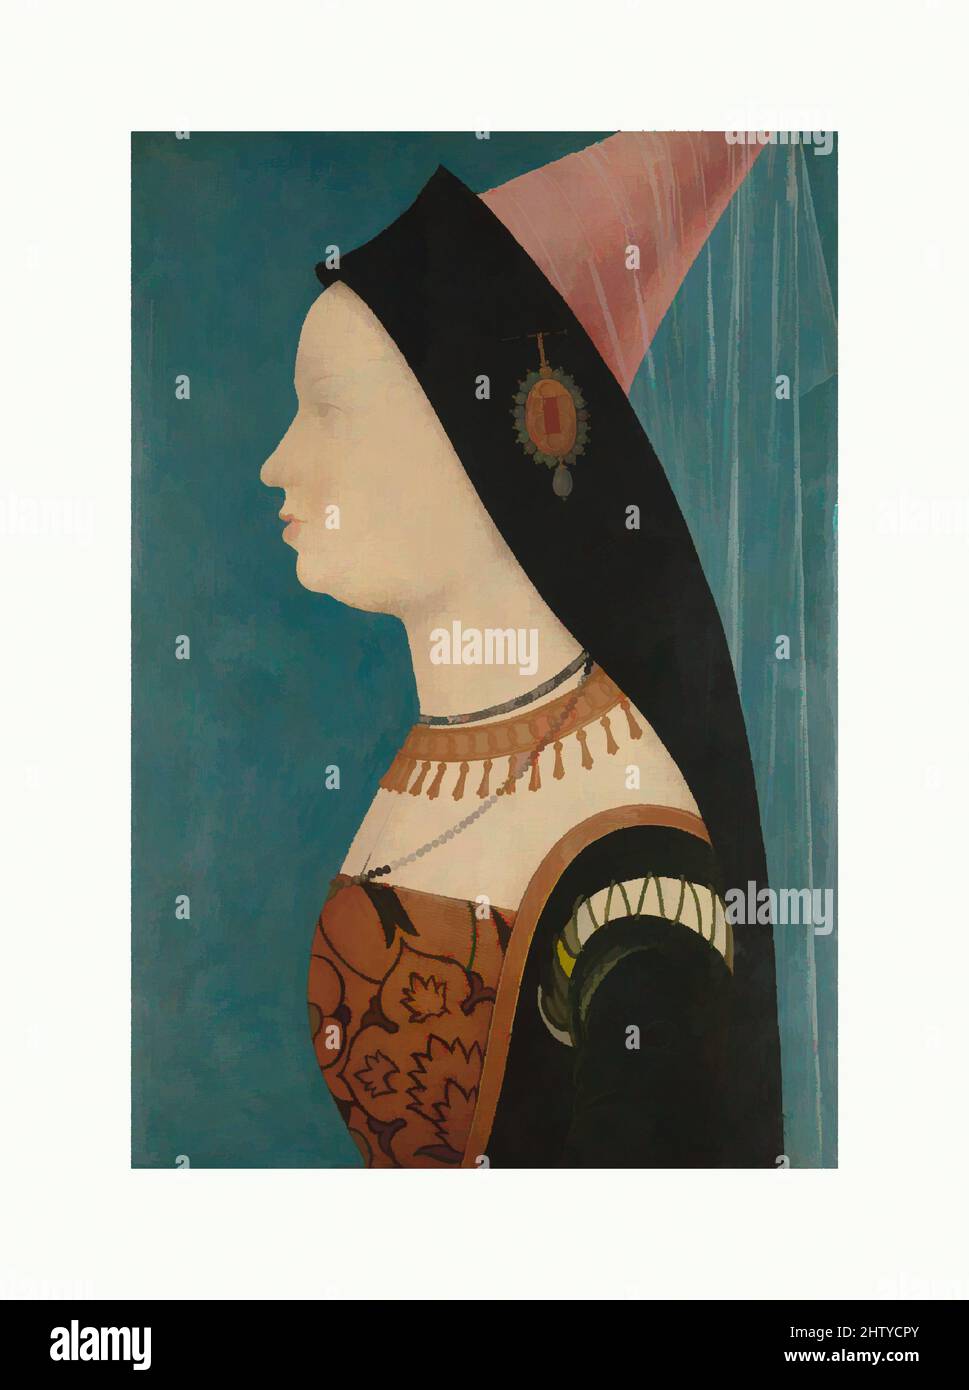 Art inspired by Mary of Burgundy, 1528, Oil on fir panel, 17 5/8 x 12 3/16 in. (44.8 x 31 cm); painted surface 17 5/16 x 12 in. (43.9 x 30.5 cm), Paintings, Master H.A. or A.H. (Austrian, Tirol (?), active late 1520s), Mary, duchess of Burgundy (1457–1482), was the first wife of, Classic works modernized by Artotop with a splash of modernity. Shapes, color and value, eye-catching visual impact on art. Emotions through freedom of artworks in a contemporary way. A timeless message pursuing a wildly creative new direction. Artists turning to the digital medium and creating the Artotop NFT Stock Photo